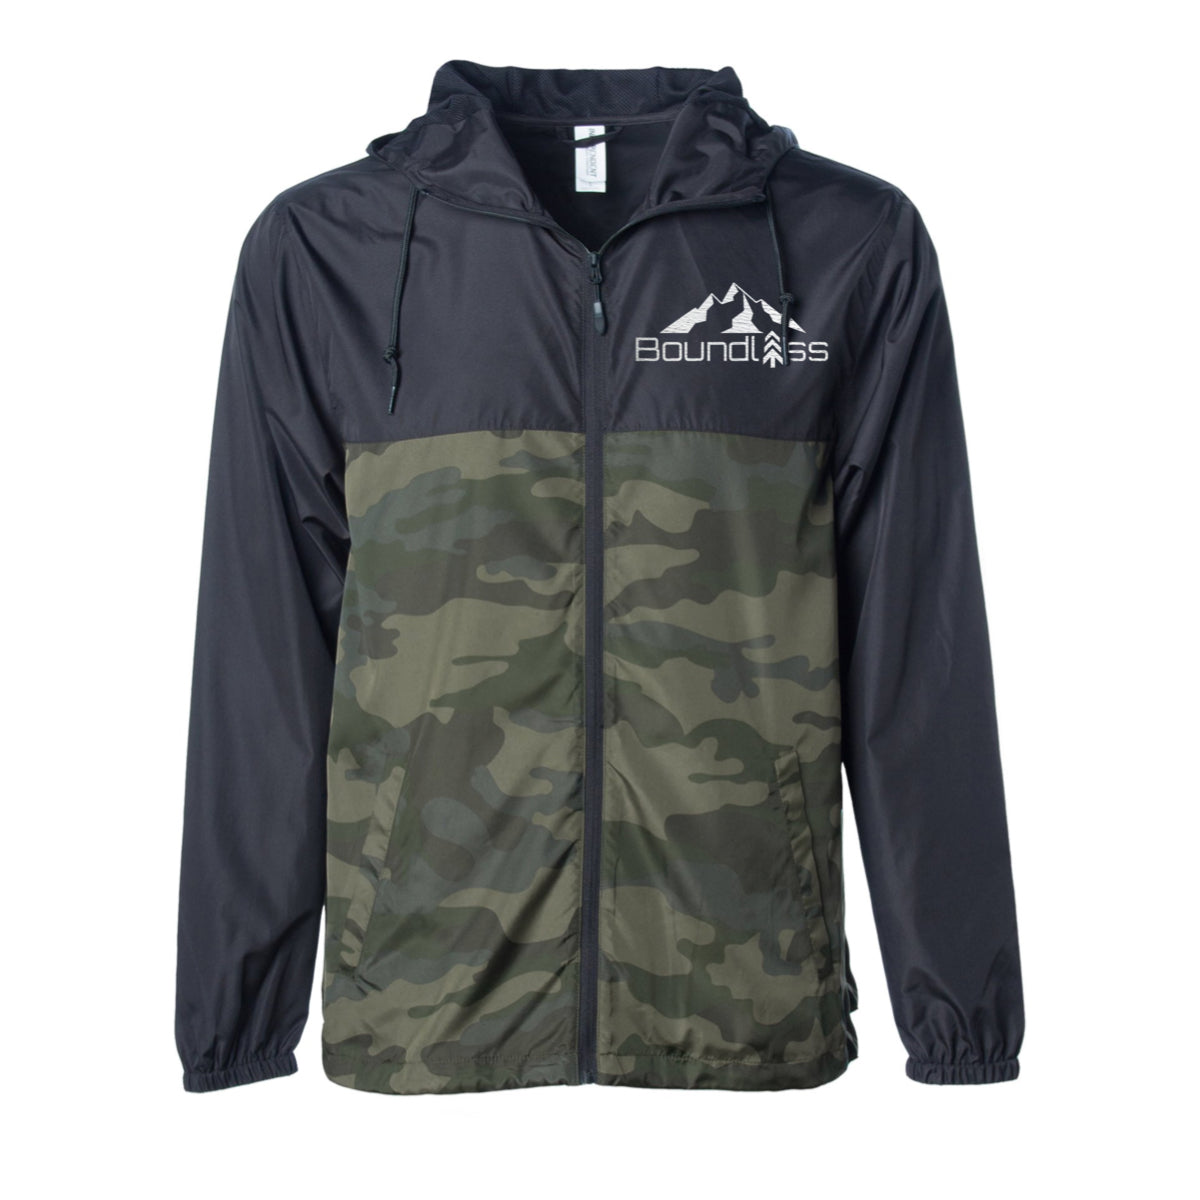 Boundless Embroidered Windbreaker Camo/Black